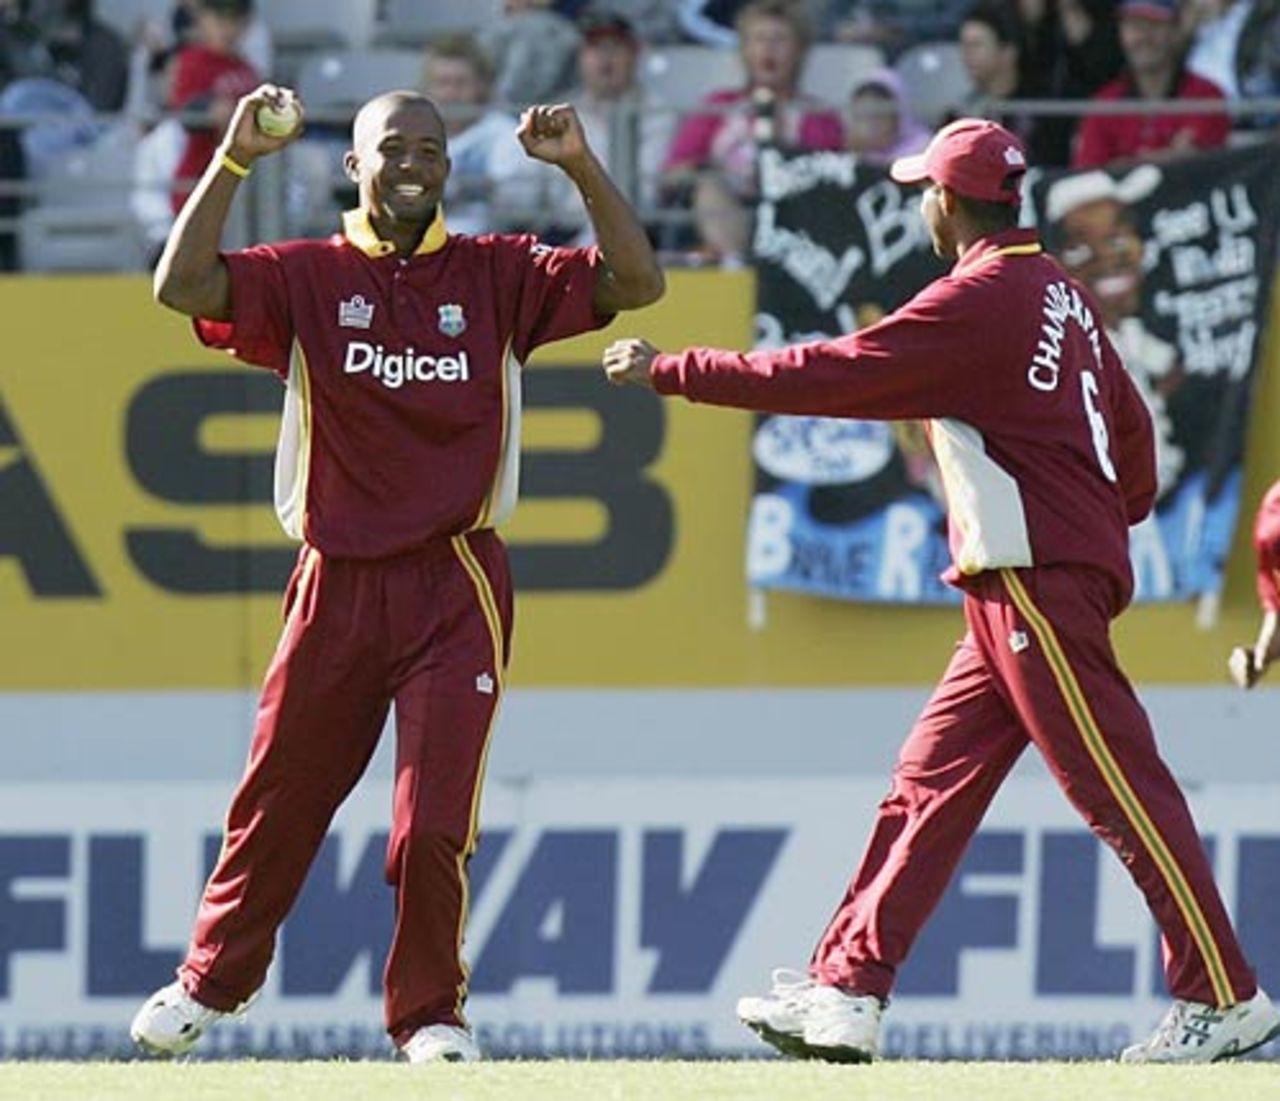 Dwayne Smith and Shivnarine Chanderpaul celebrate the dismissal of Scott Styris, New Zealand v West Indies, 5th ODI, Auckland, March 4, 2006 